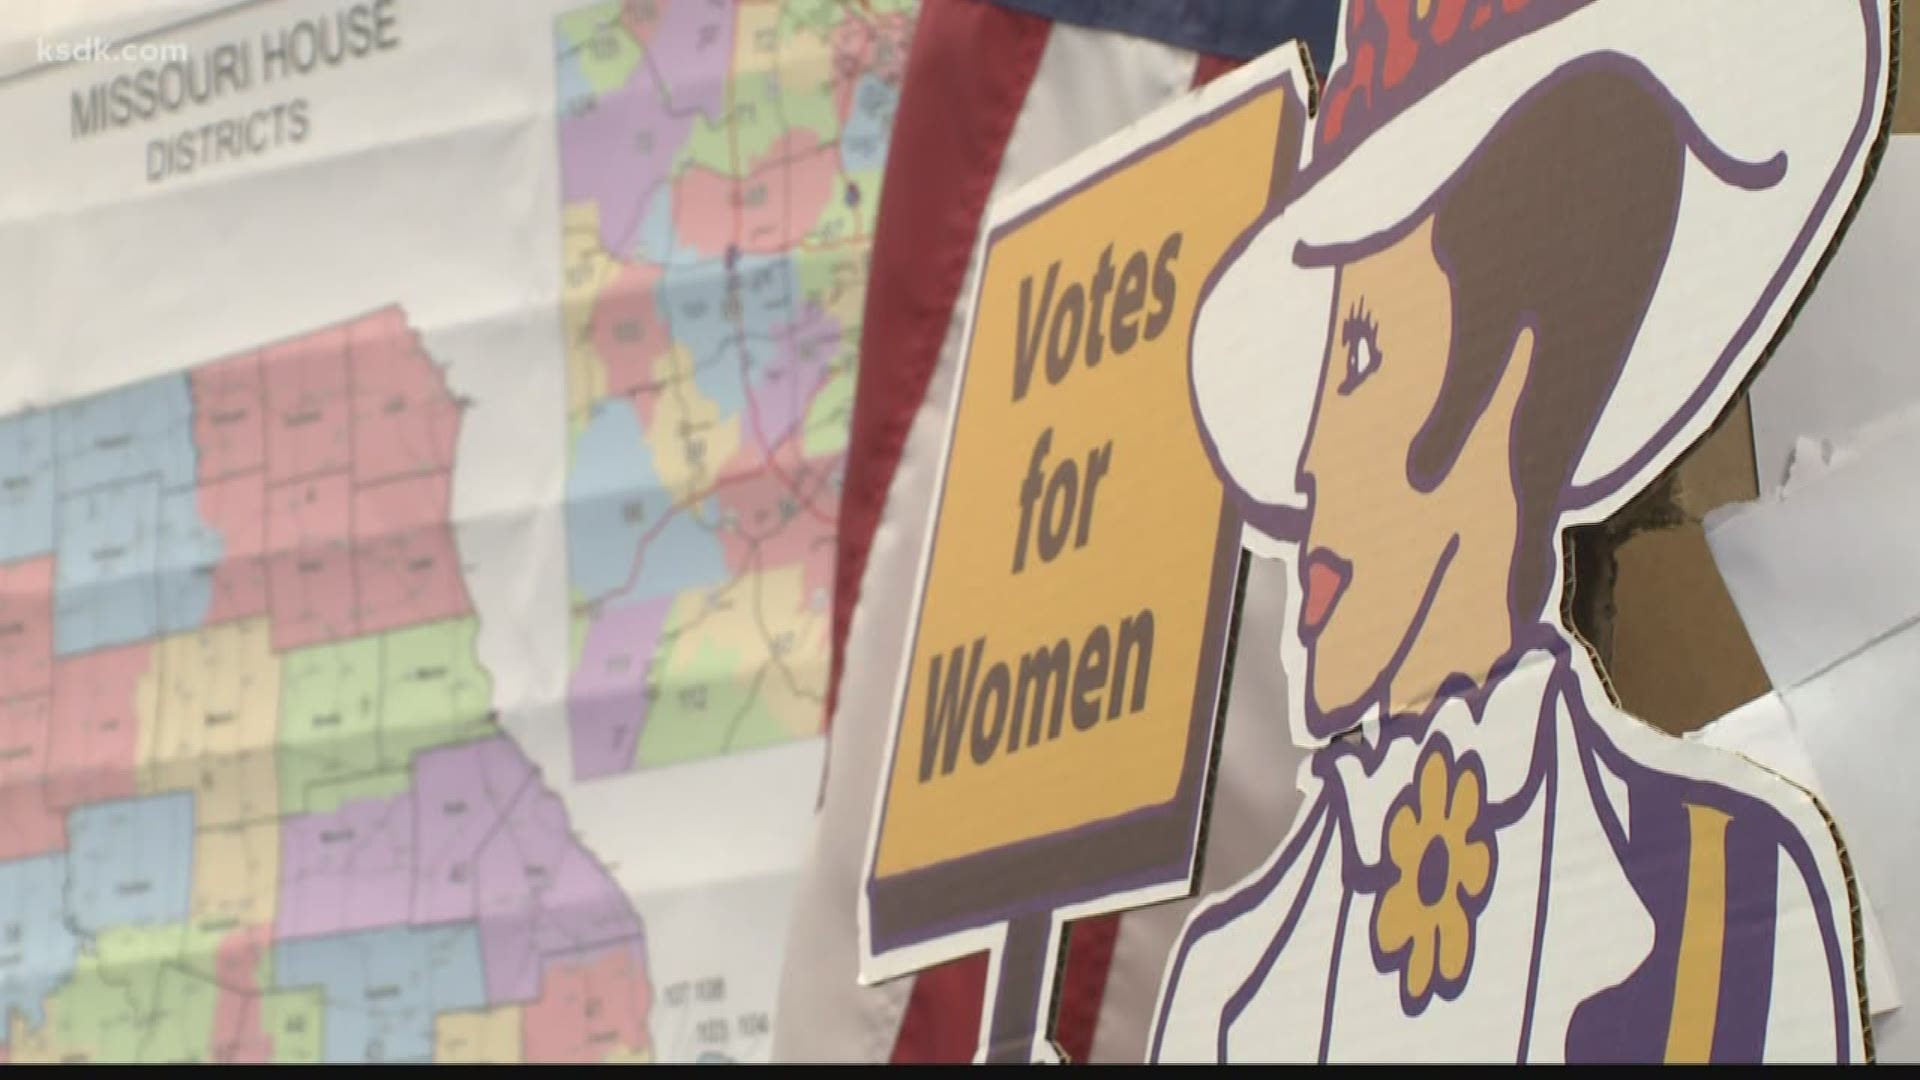 Celebrating 100 years of women voting rights